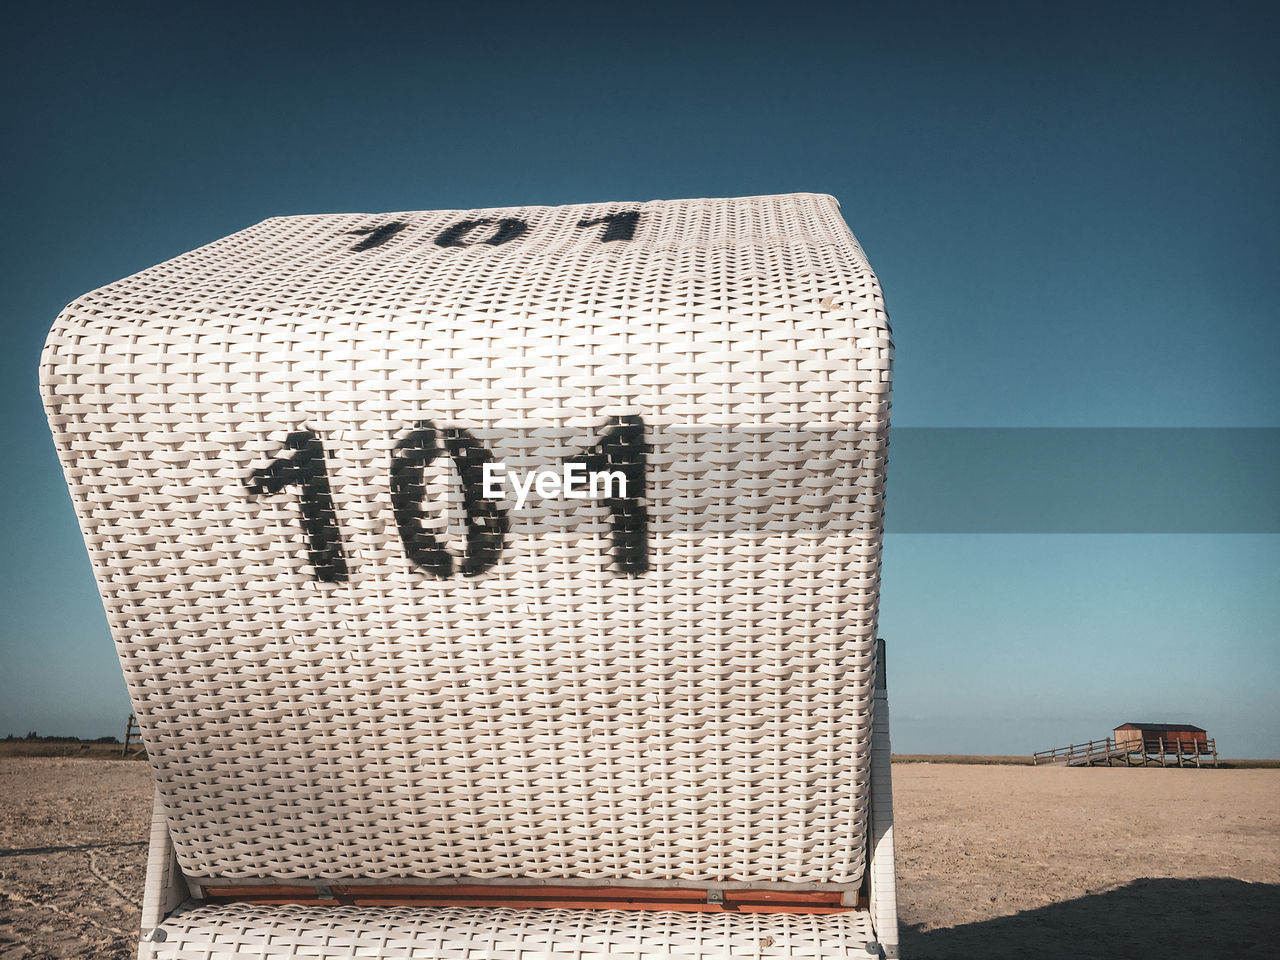 Traditional north german white beach chair with black number 101 at north sea beach against blue sky